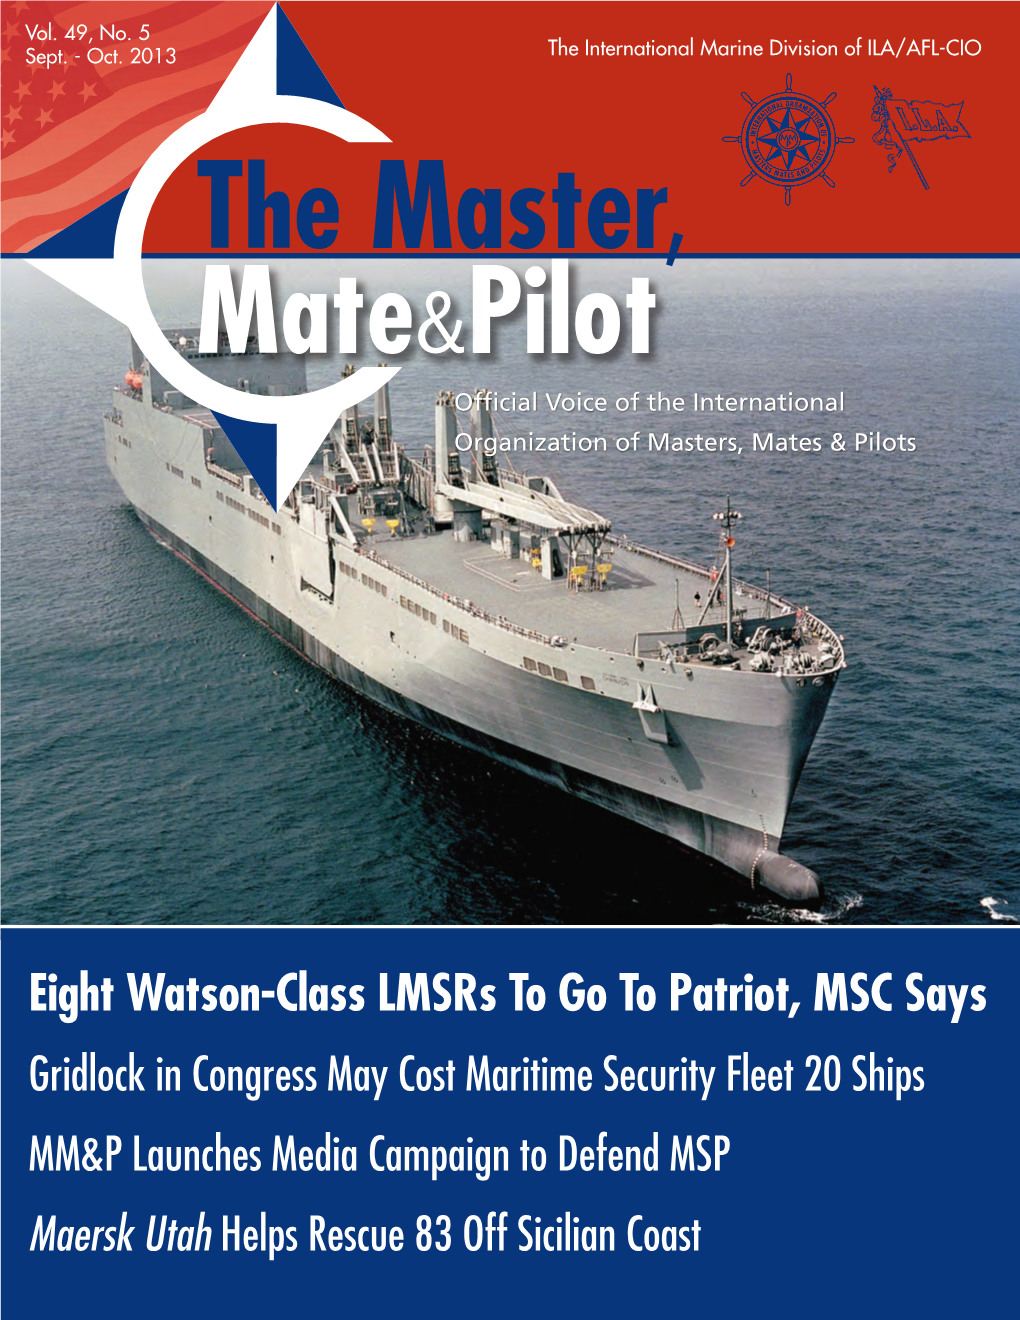 Eight Watson-Class Lmsrs to Go to Patriot, MSC Says